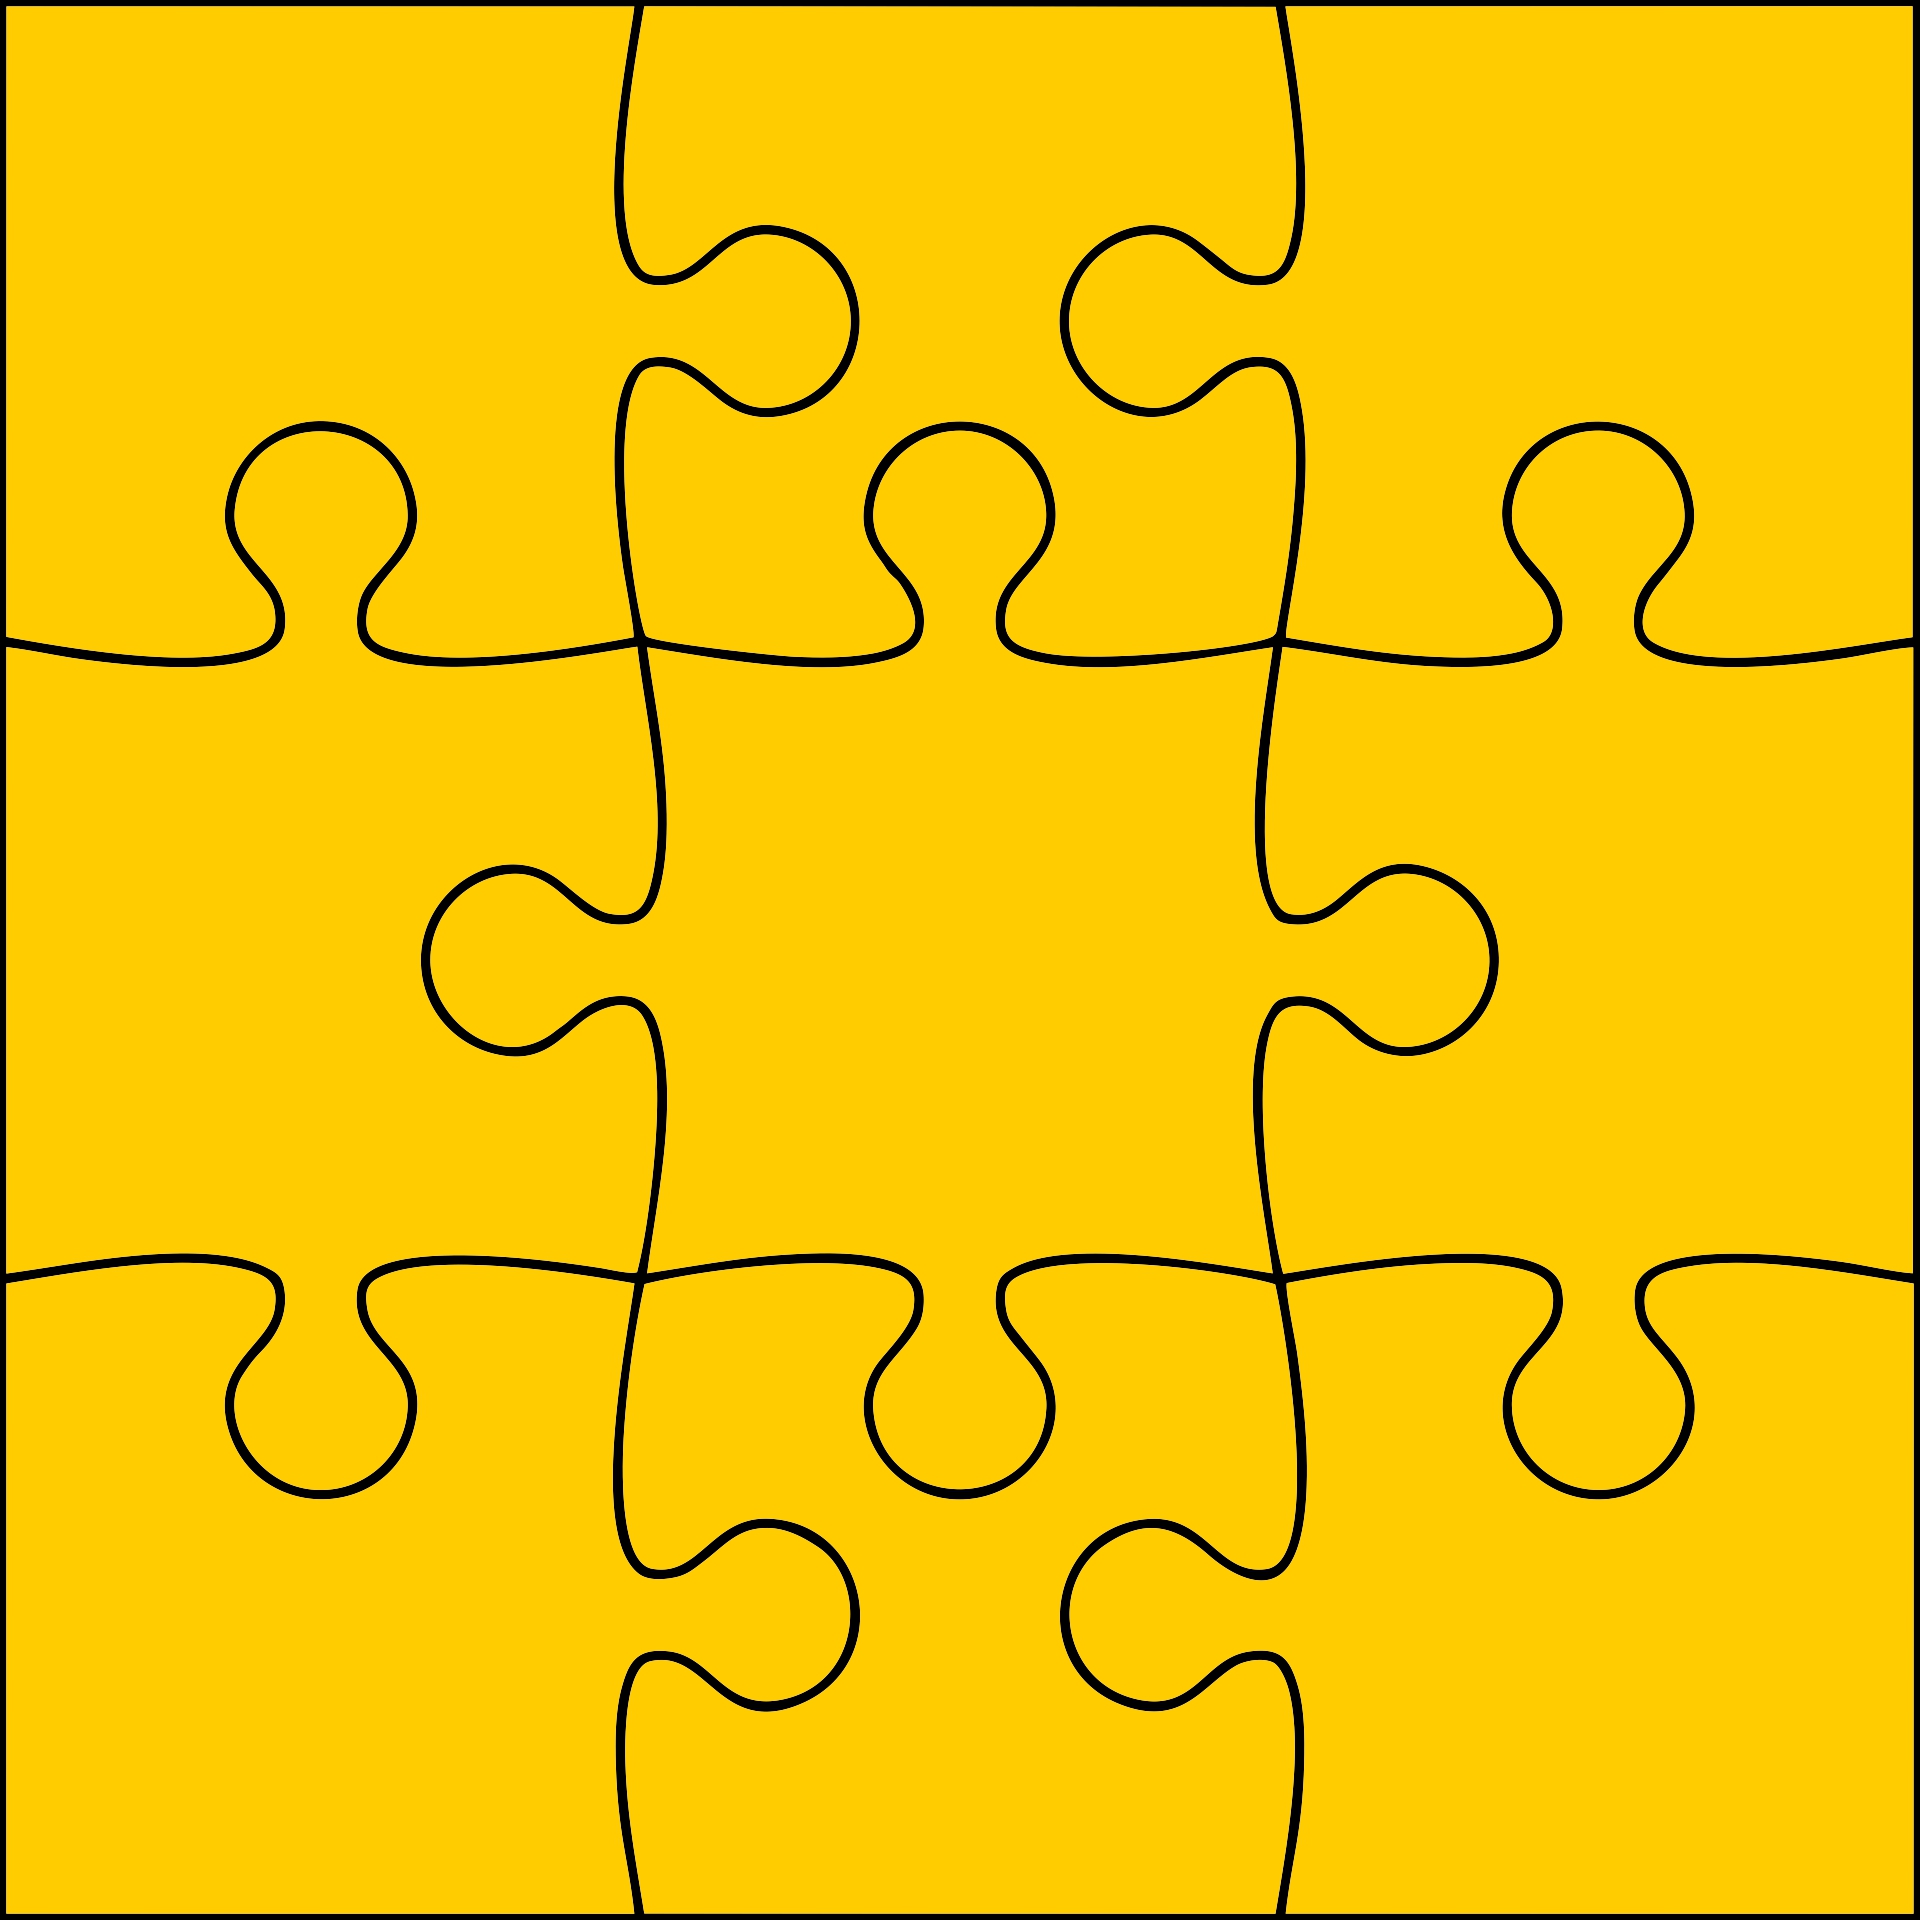 9 Piece Jigsaw Puzzle Template Printable